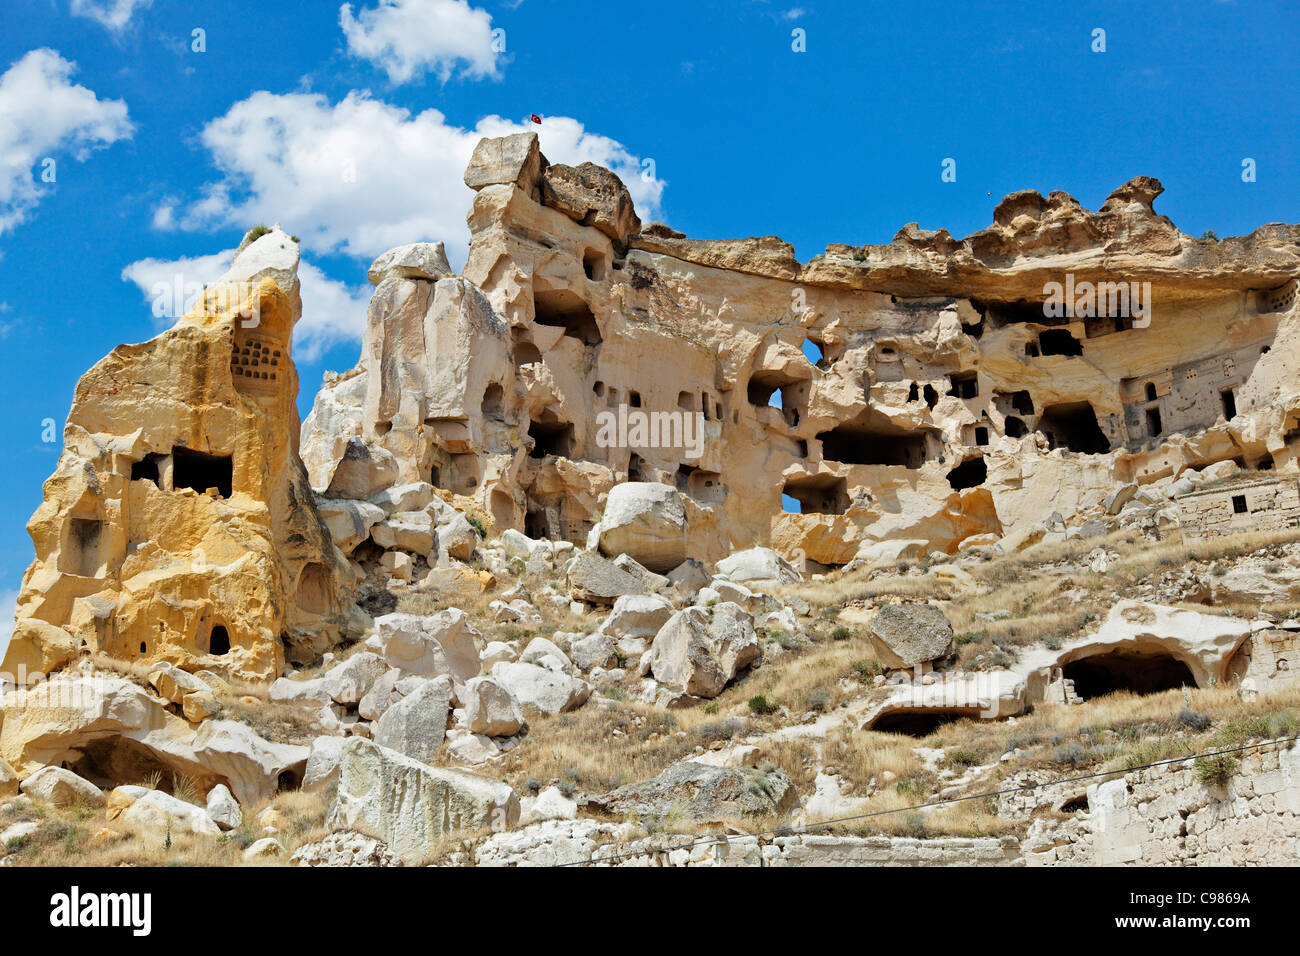 relics ruins of old cave village habitat of humans carved from limestone and sandstone hills, landscape, copy space crop margins Stock Photo